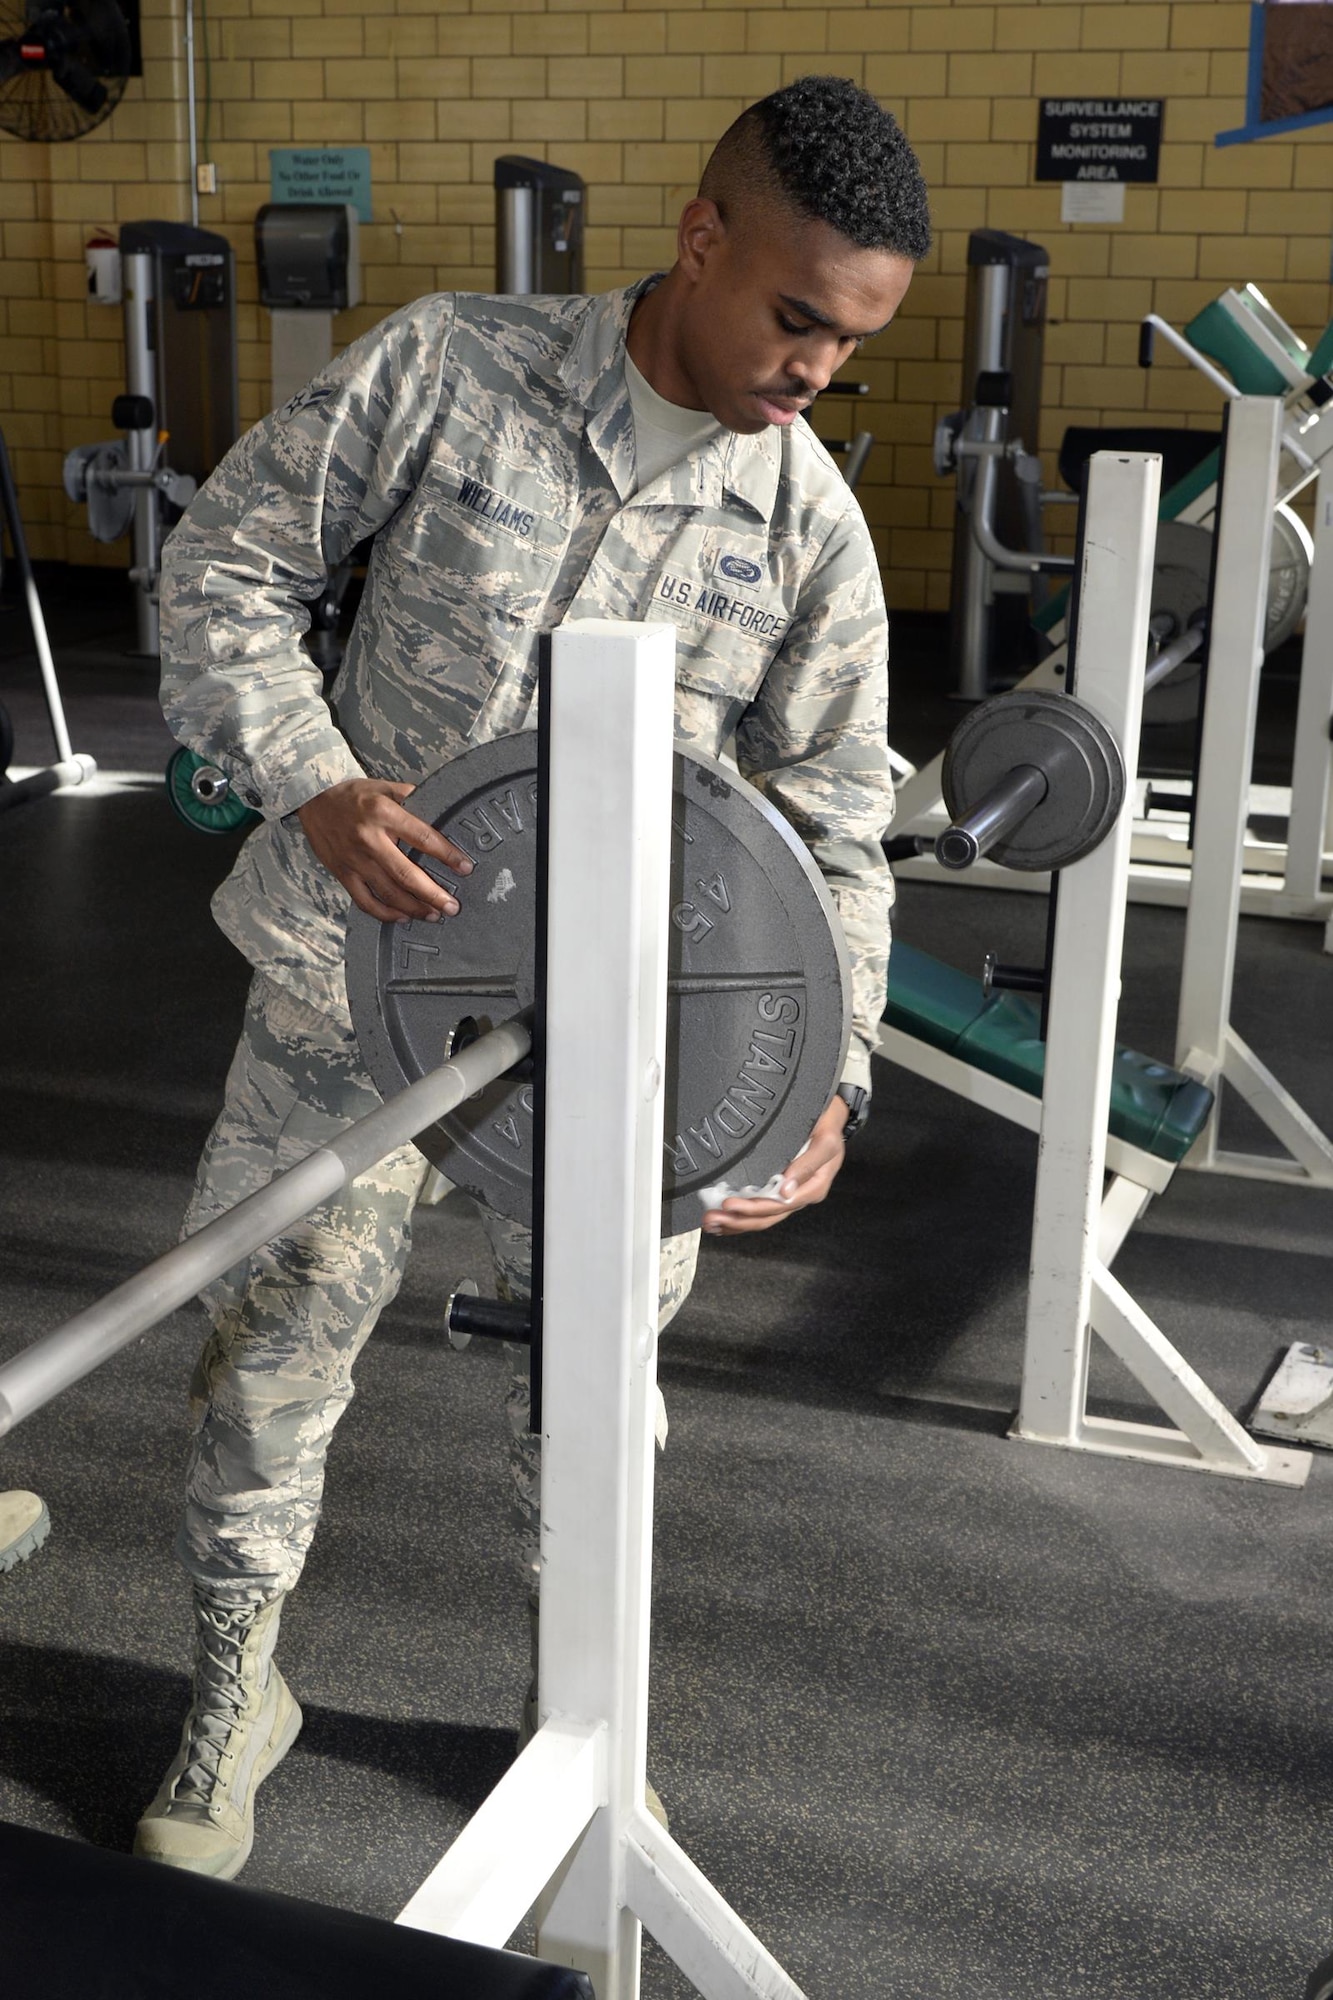 Airman 1st Class Terrell Williams, 75th Force Support Squadron, cleans workout equipment at the George E. Whalen Veterans Affairs Medical Center in Salt Lake City, Nov. 3. Hill Air Force Base Airmen teamed up with community partners for the Department of Defense’s annual ‘Commitment to Service’ project, an enterprise aimed at bettering communities across the nation. (U.S. Air Force photo by Todd Cromar)